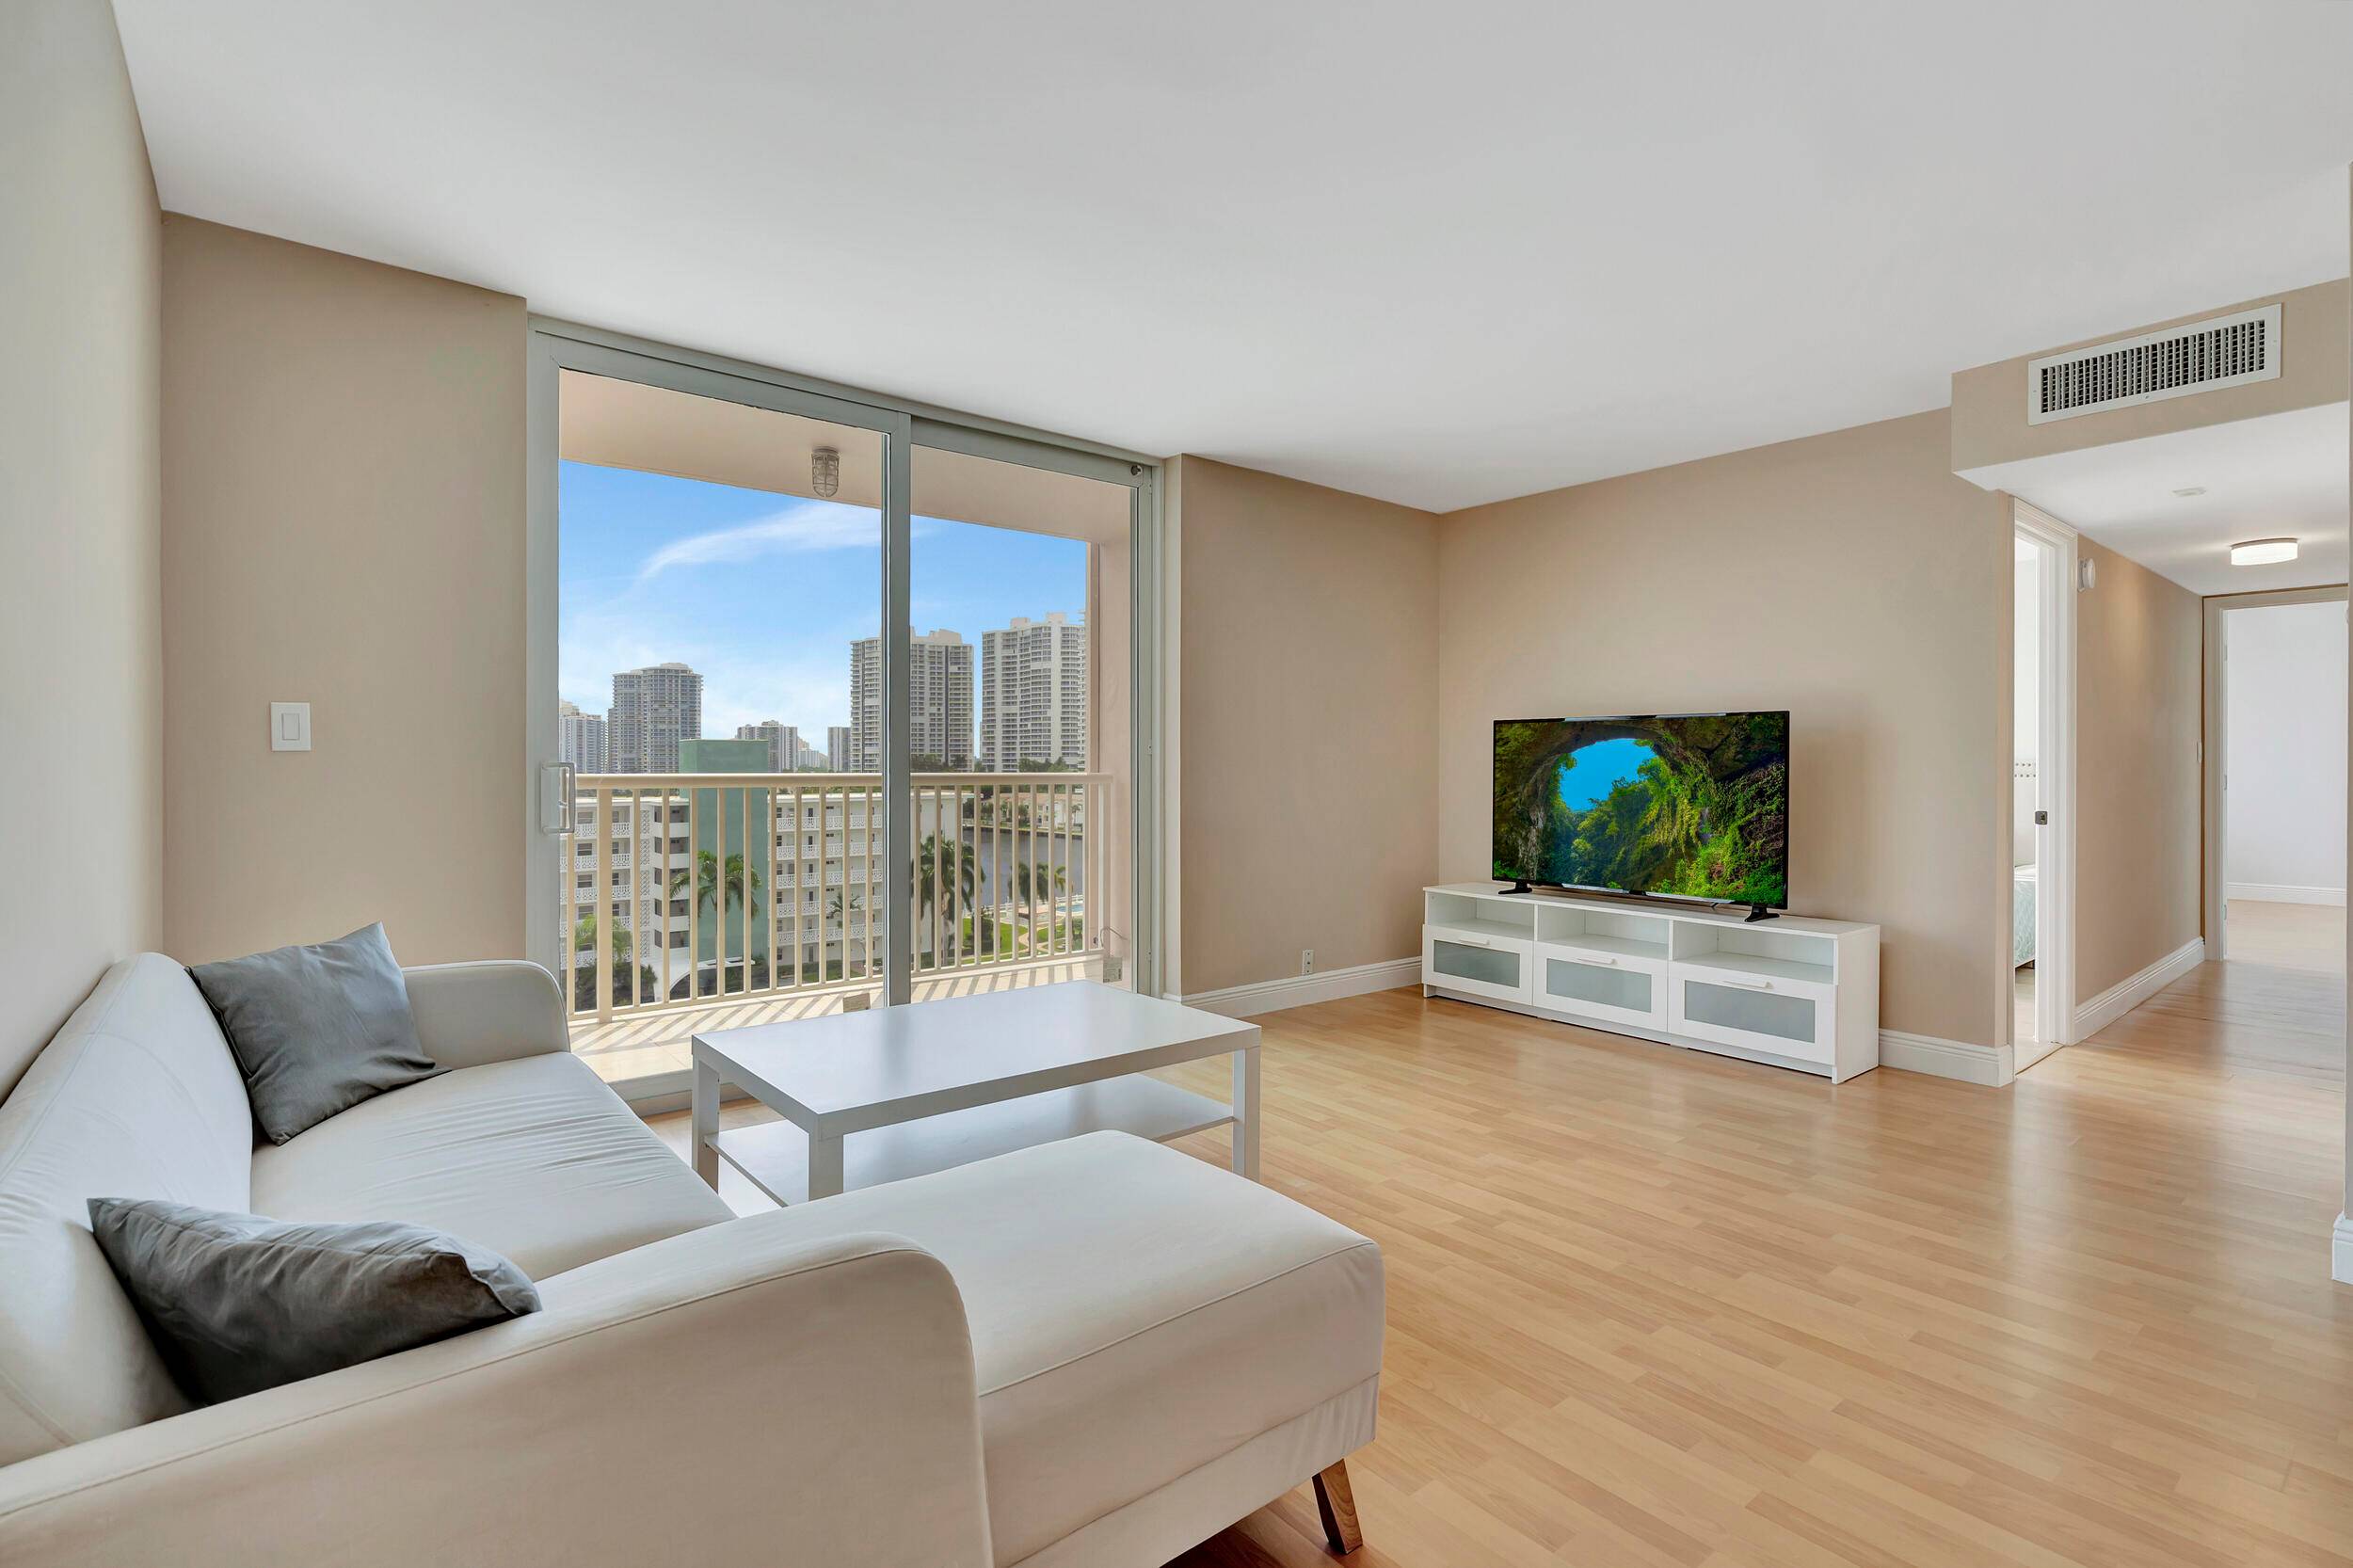 UTILITIES INCLUDED ! Wake up every morning to the stunning panoramic views of Sunny Isles, Aventura and Miami from every window in the beautifully remodeled 2bd 2bath unit located on ...